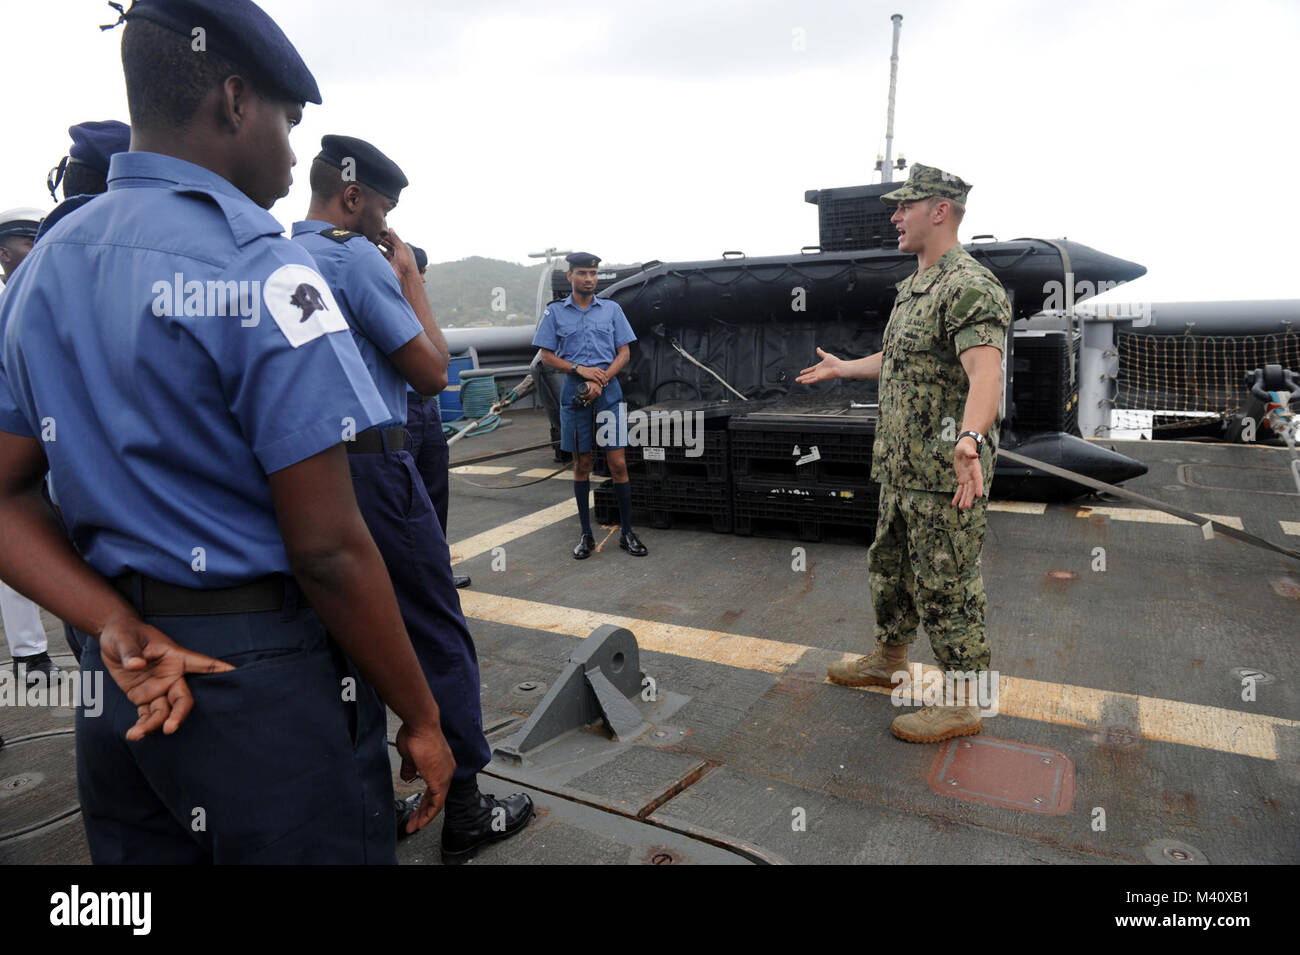 120319-N-BJ279-175  CHAGUARAMAS, Trinidad and Tobago â (March 19, 2012) Navy Diver 1st Class Shane Parton, assigned to Mobile Diving and Salvage Unit (MDSU) 2, Company 2-1, talks to Trinidad and Tobago Sailors about the towing and salvage capabilities of the Military Sealift Command rescue and salvage ship USNS Grapple (T-ARS 53). Company 2-1 is participating in Navy Dive Southern Partnership Station 2012, a multinational partnership engagement designed to increase interoperability and partner nation capacity through diving operations. (U.S. Navy photo by Mass Communication Specialist 2nd Clas Stock Photo